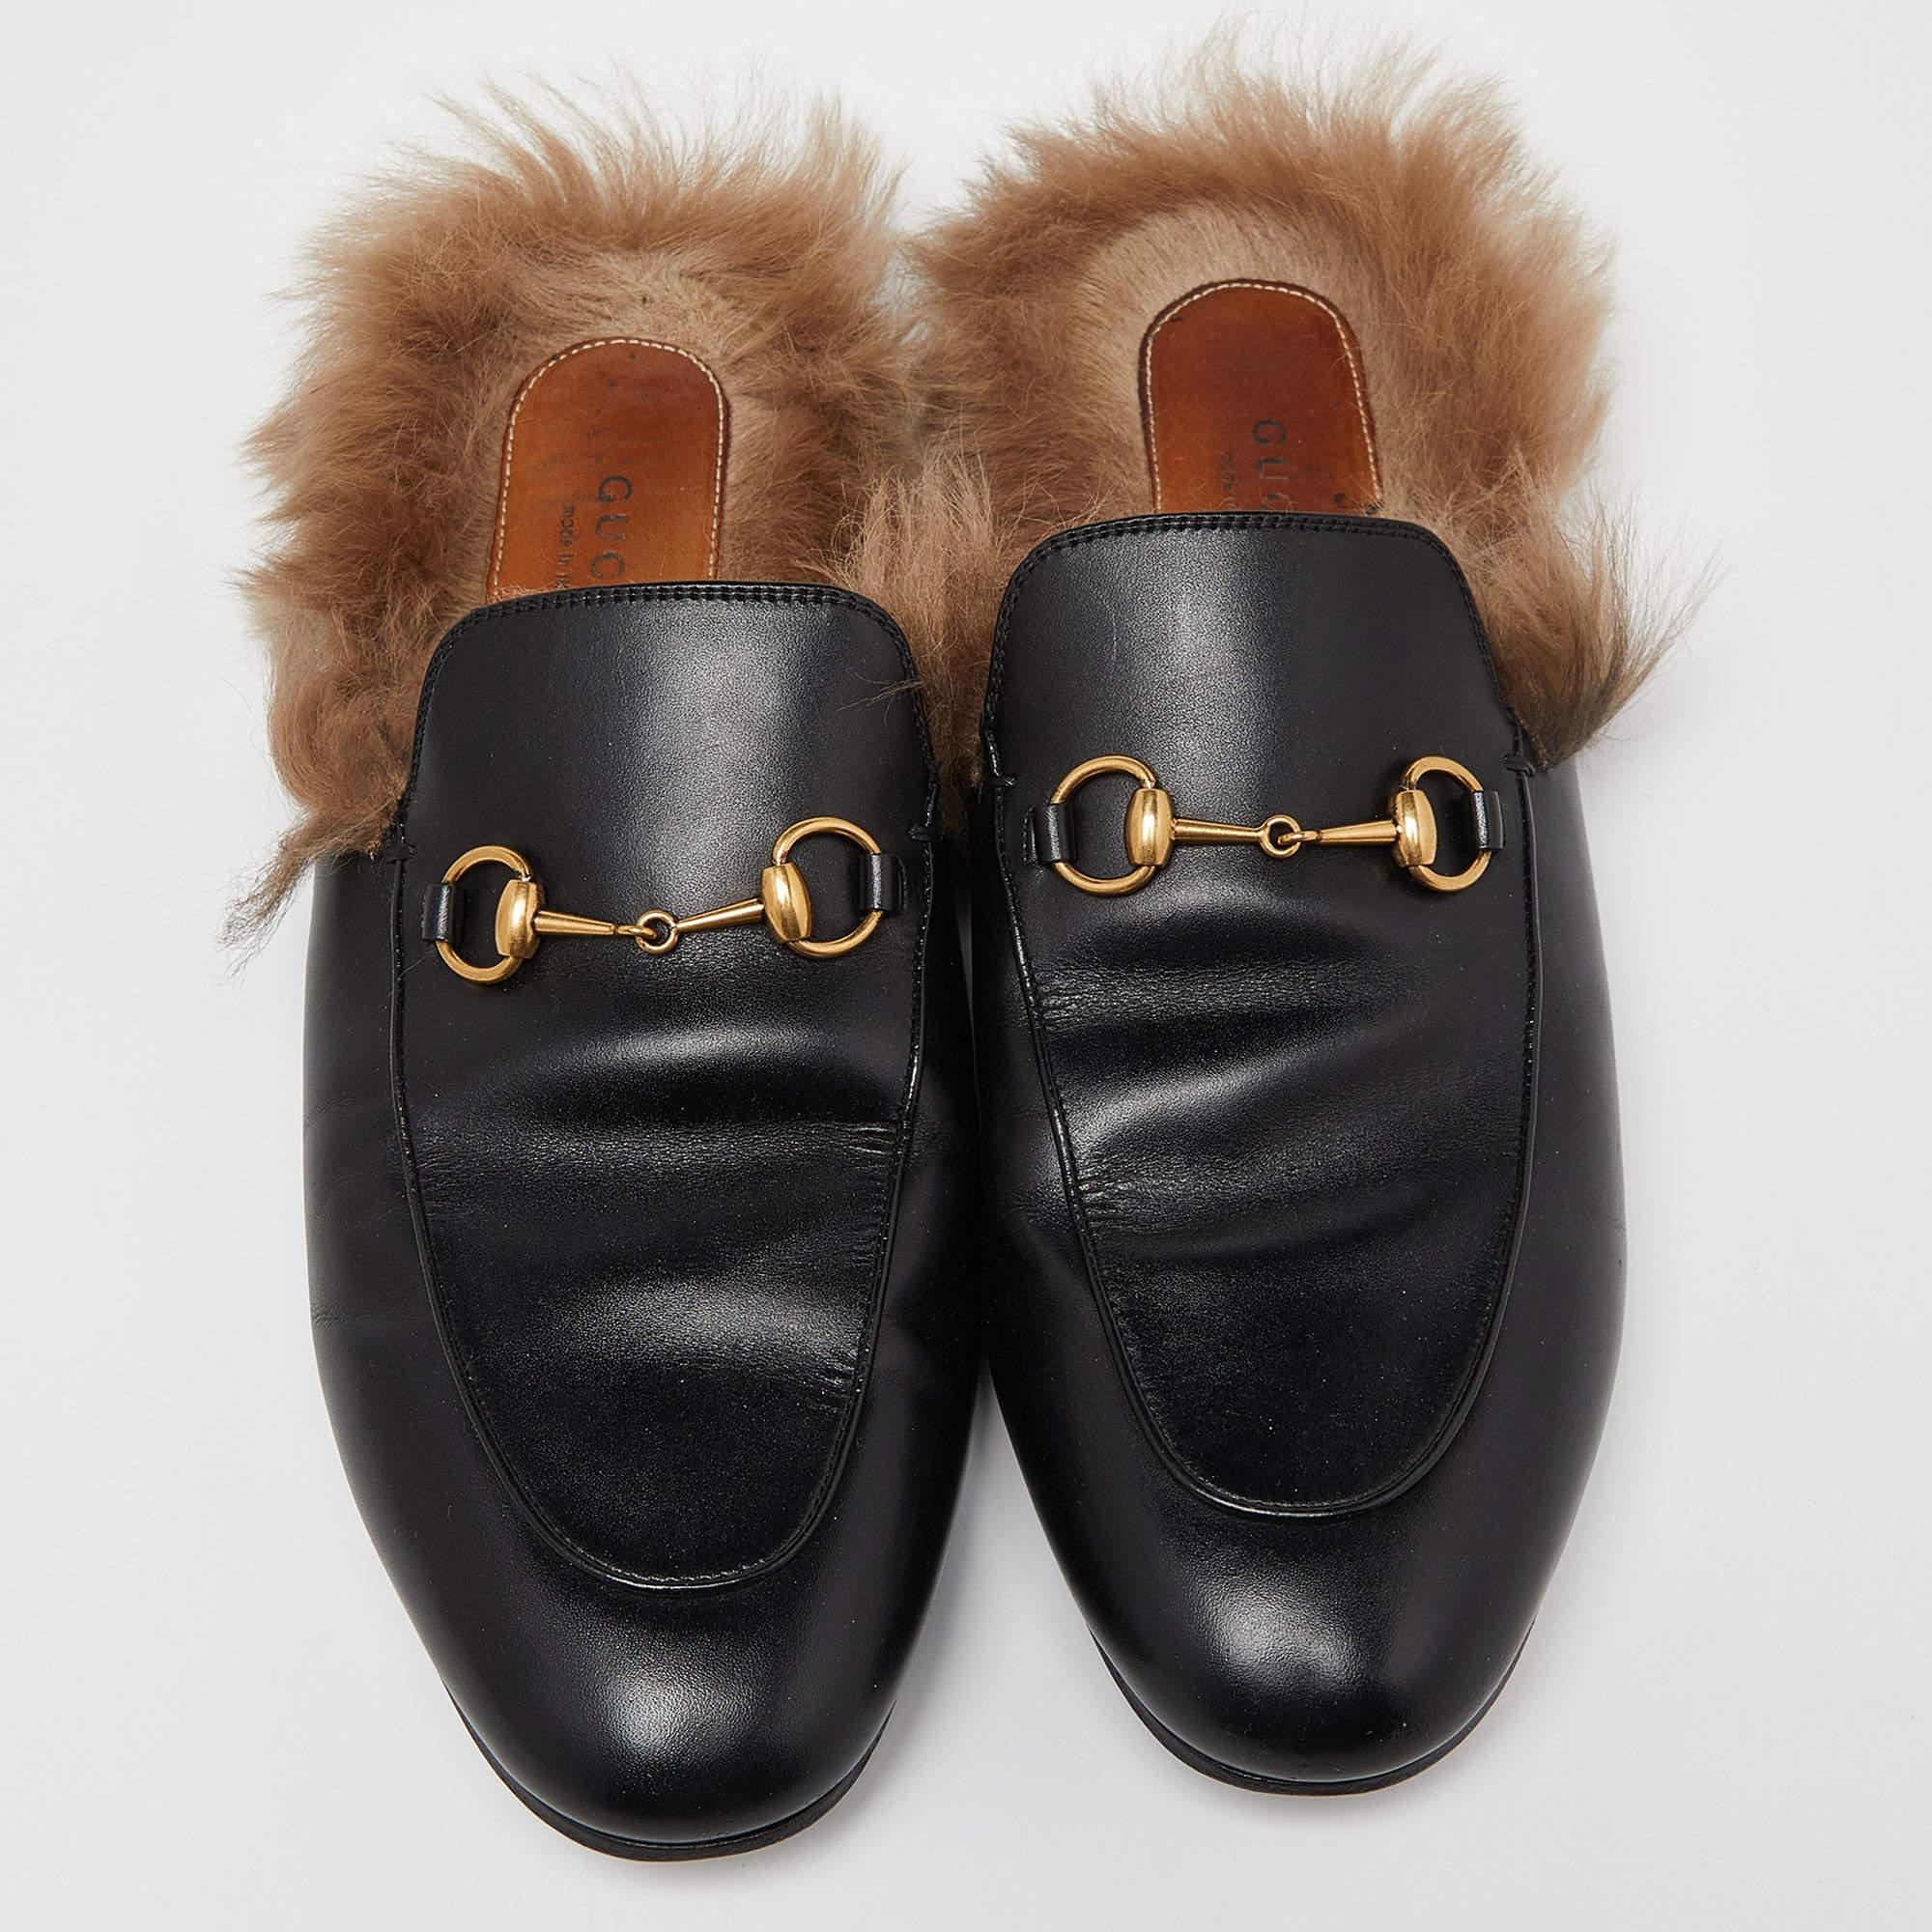 Gucci Black Leather and Fur Princetown Flat Mules Size 41 2